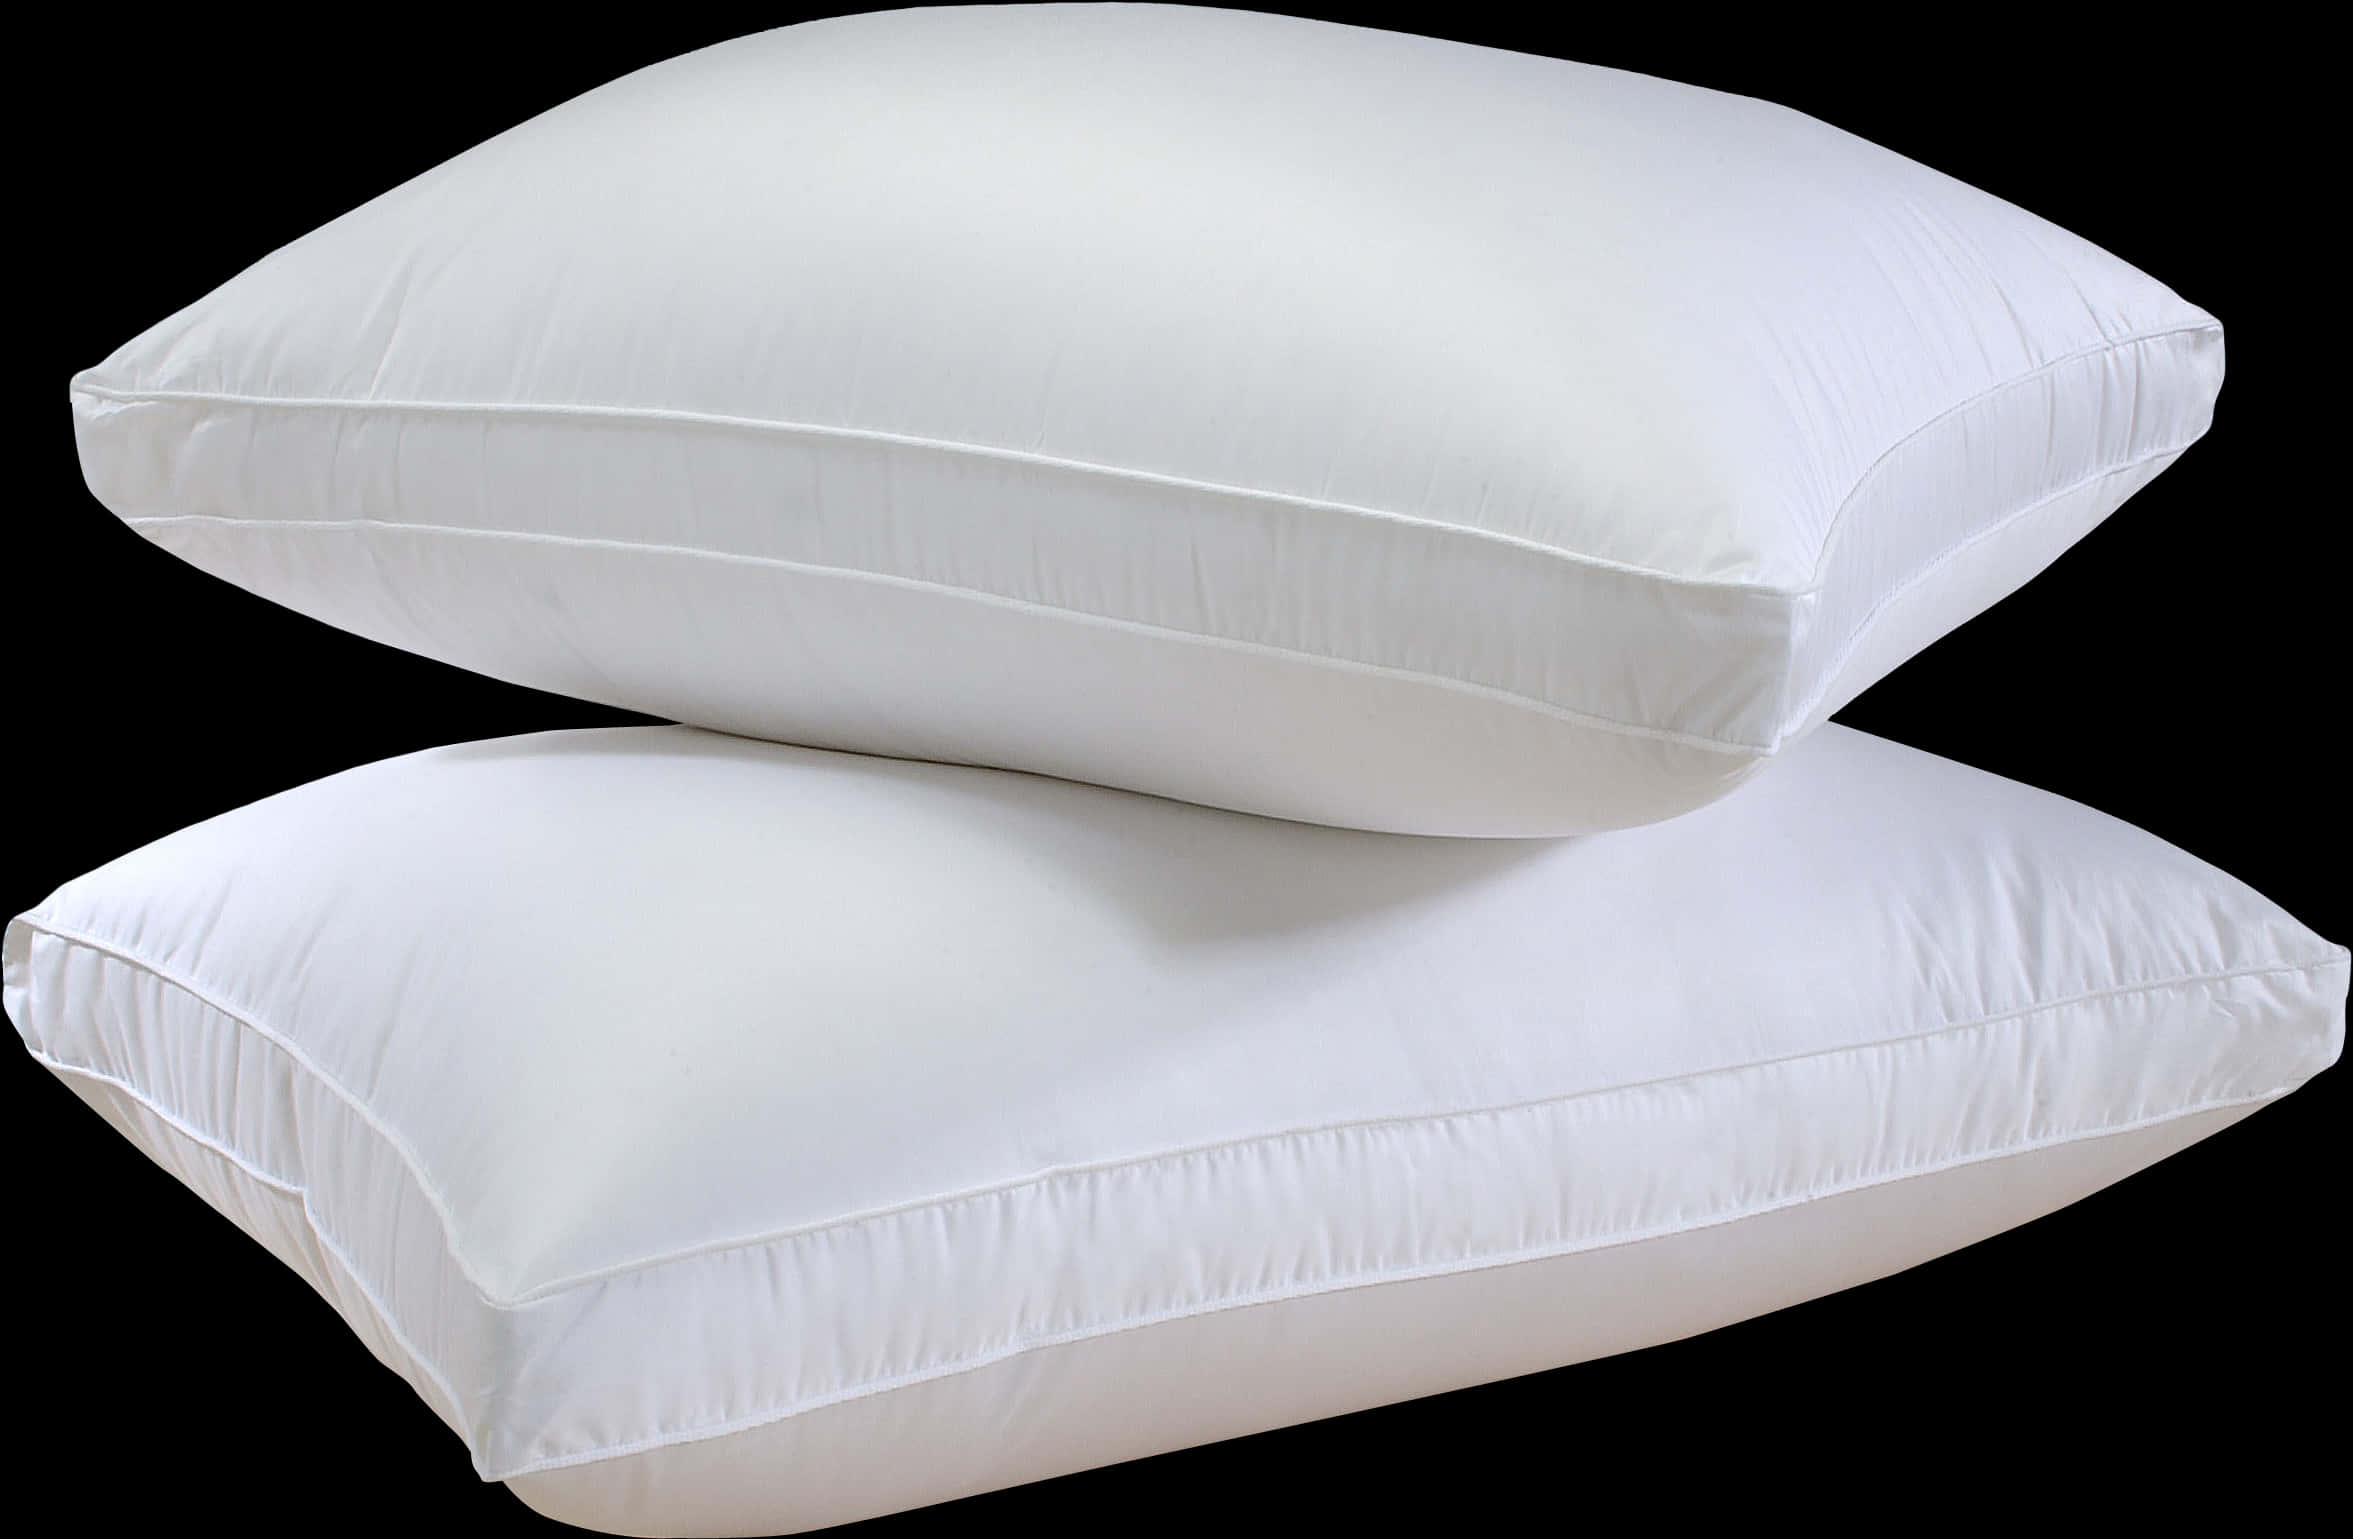 A Stack Of White Pillows